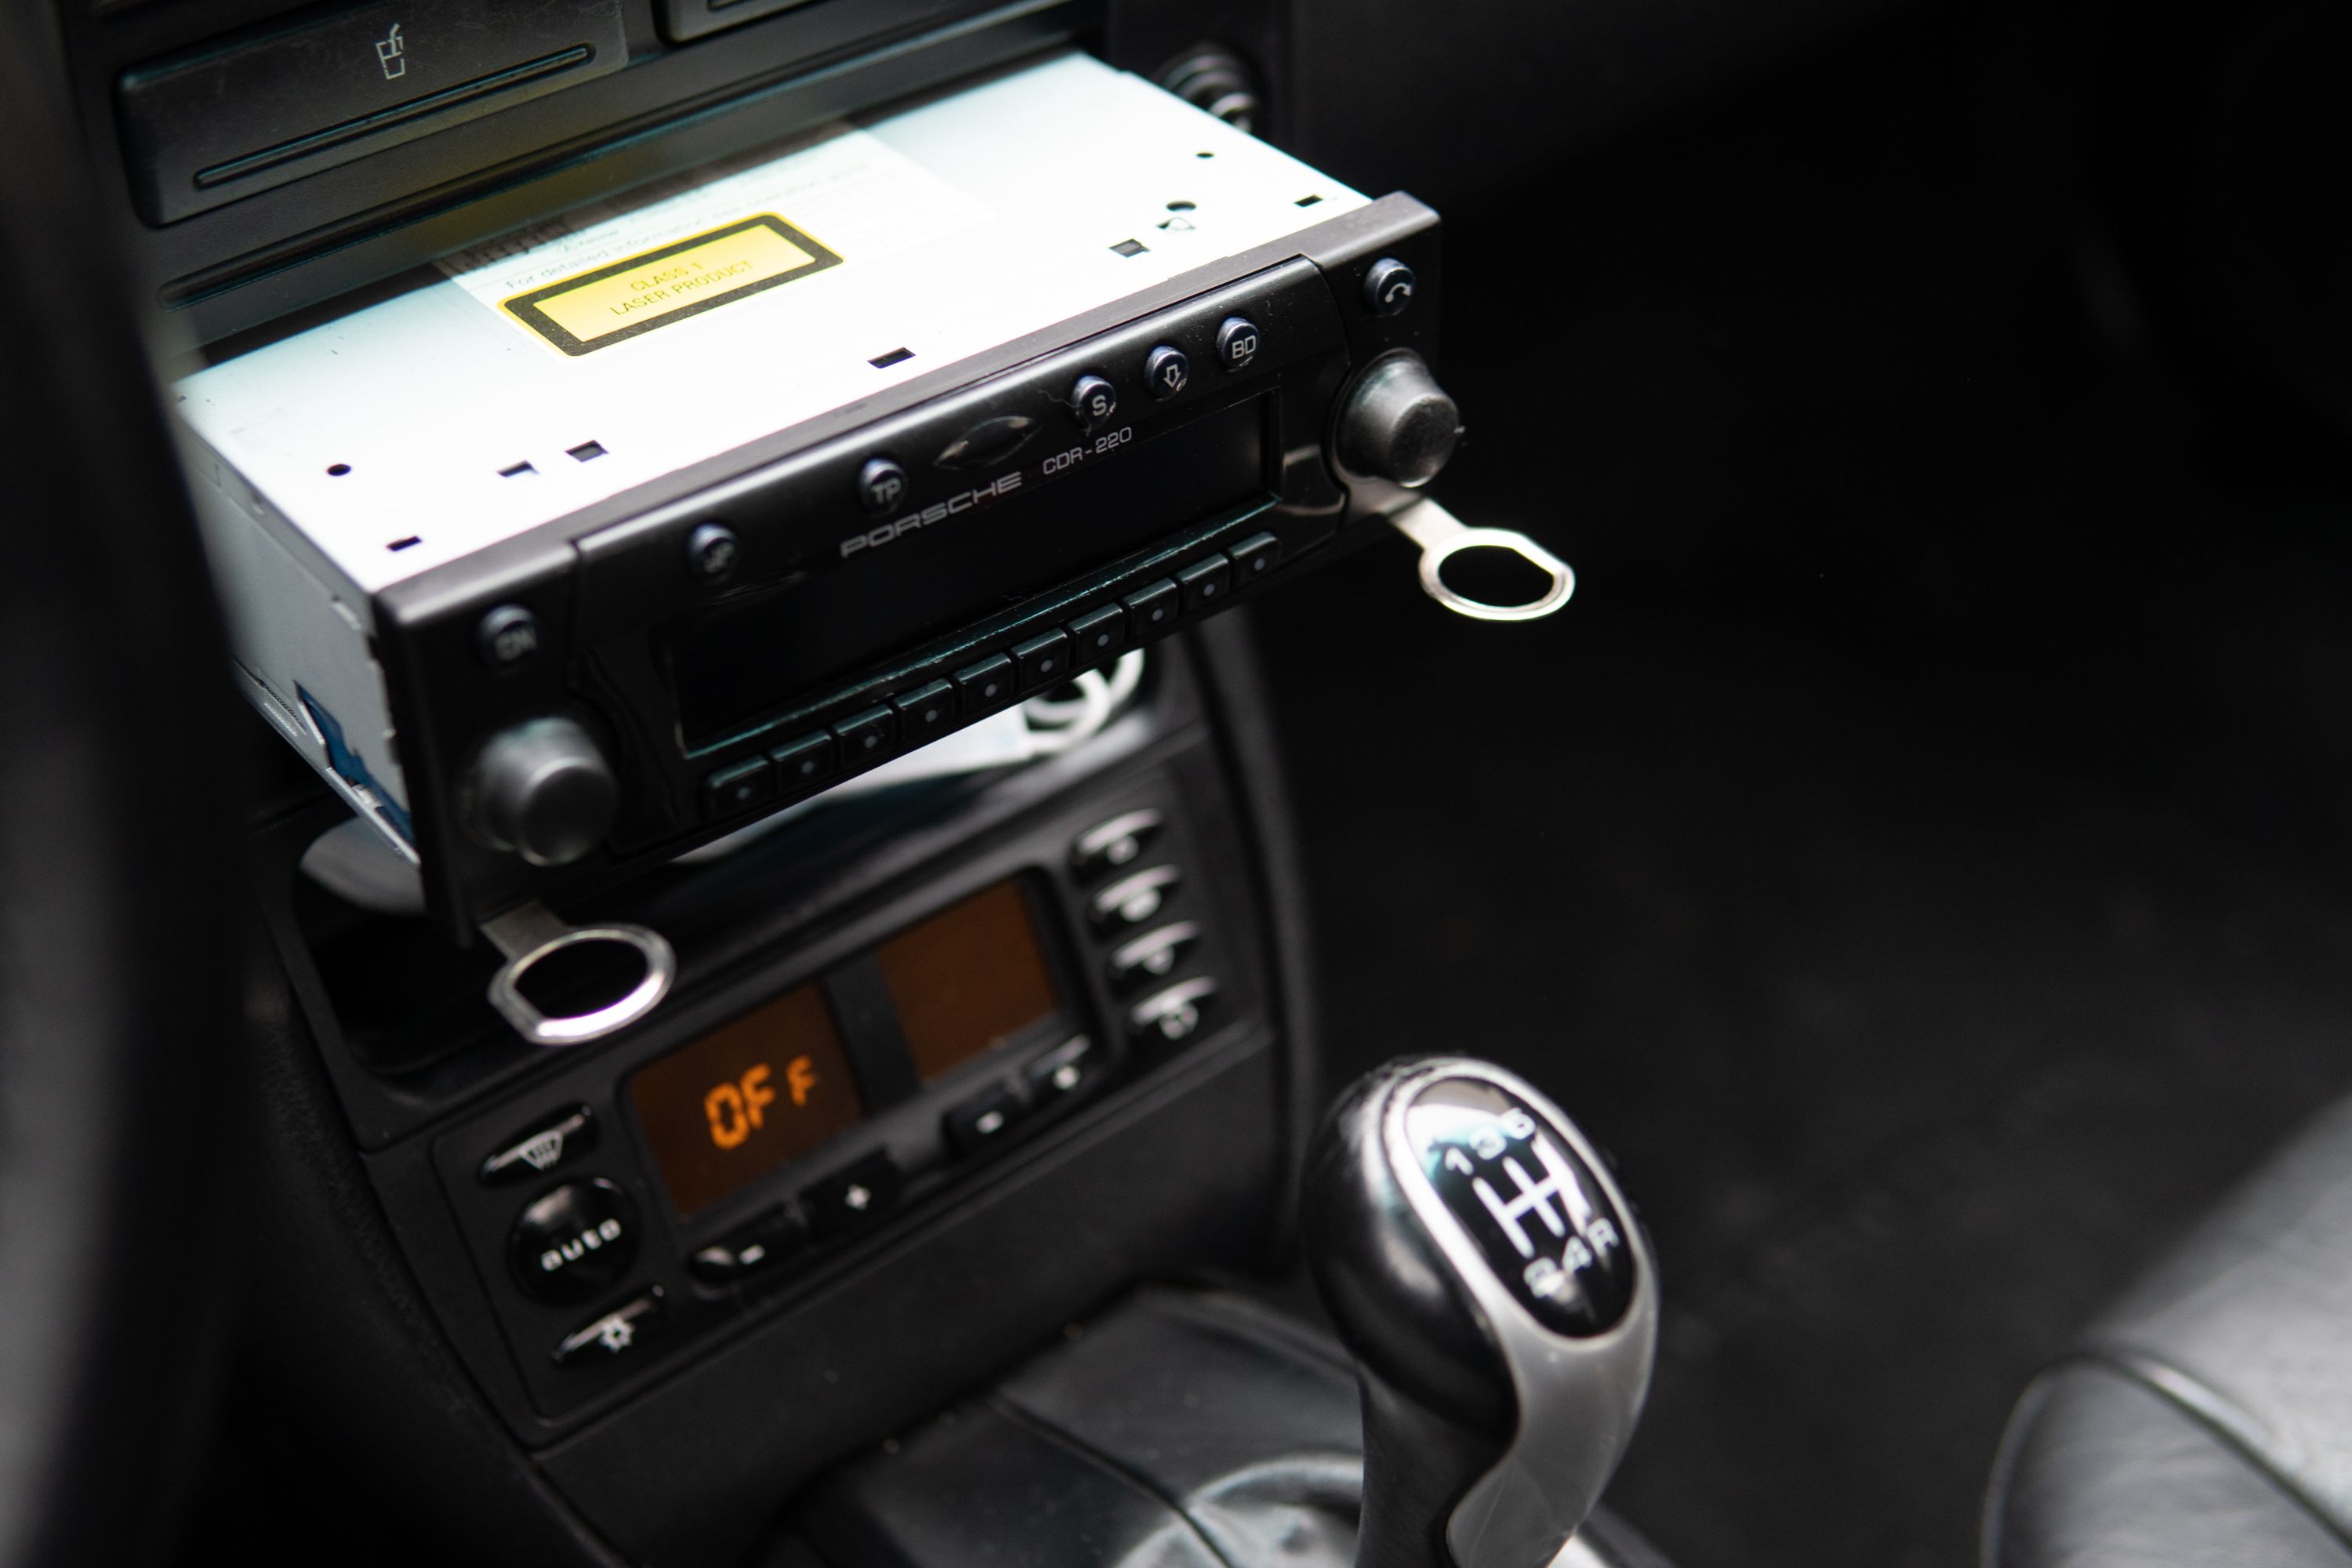 How to Add Bluetooth to an Old Car Radio in Two Easy Steps